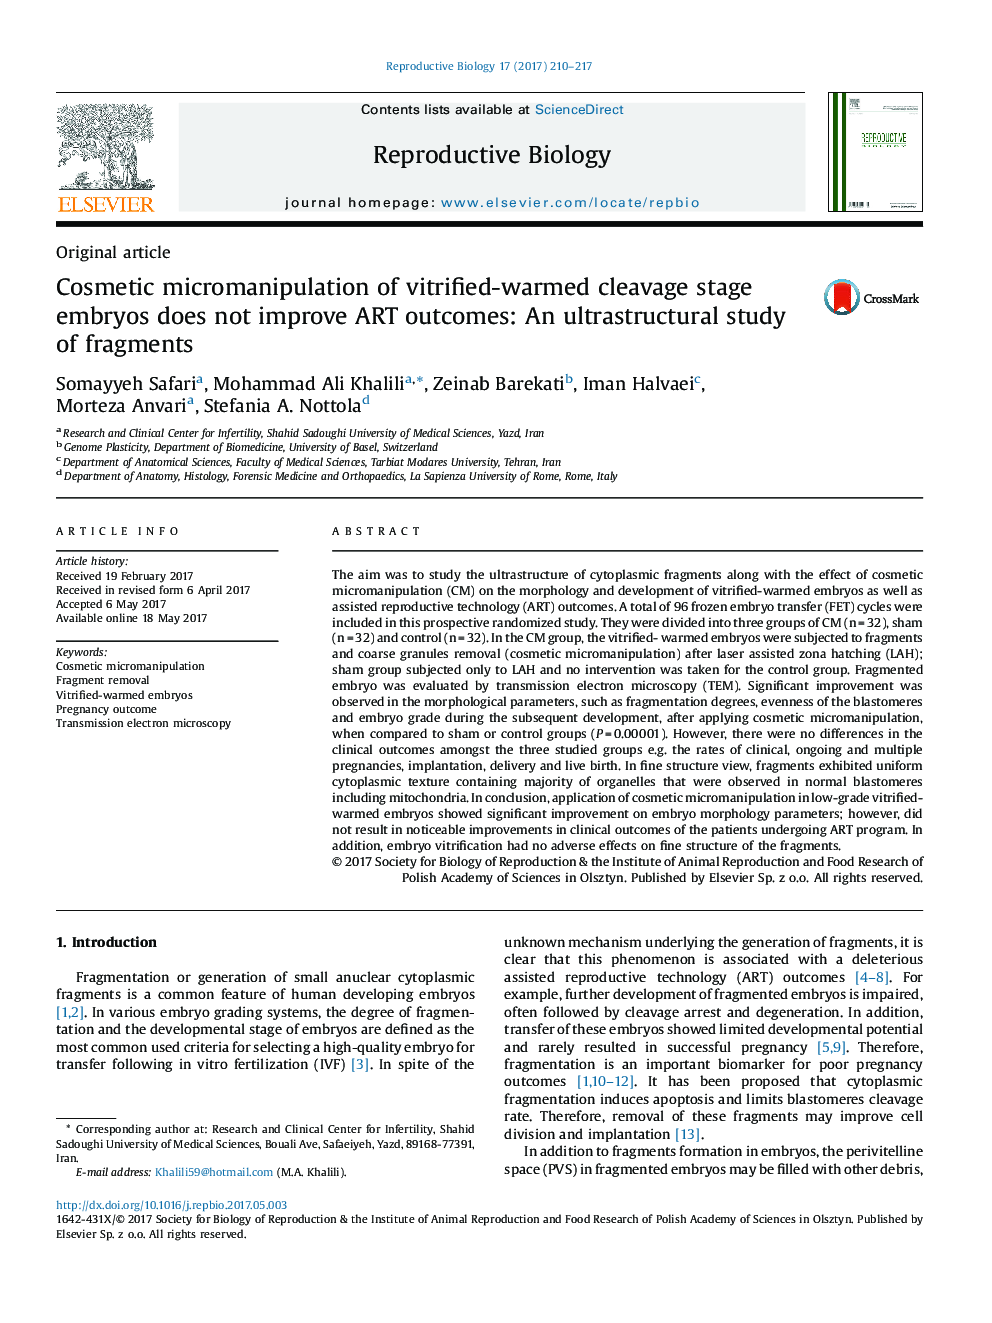 Original articleCosmetic micromanipulation of vitrified-warmed cleavage stage embryos does not improve ART outcomes: An ultrastructural study of fragments